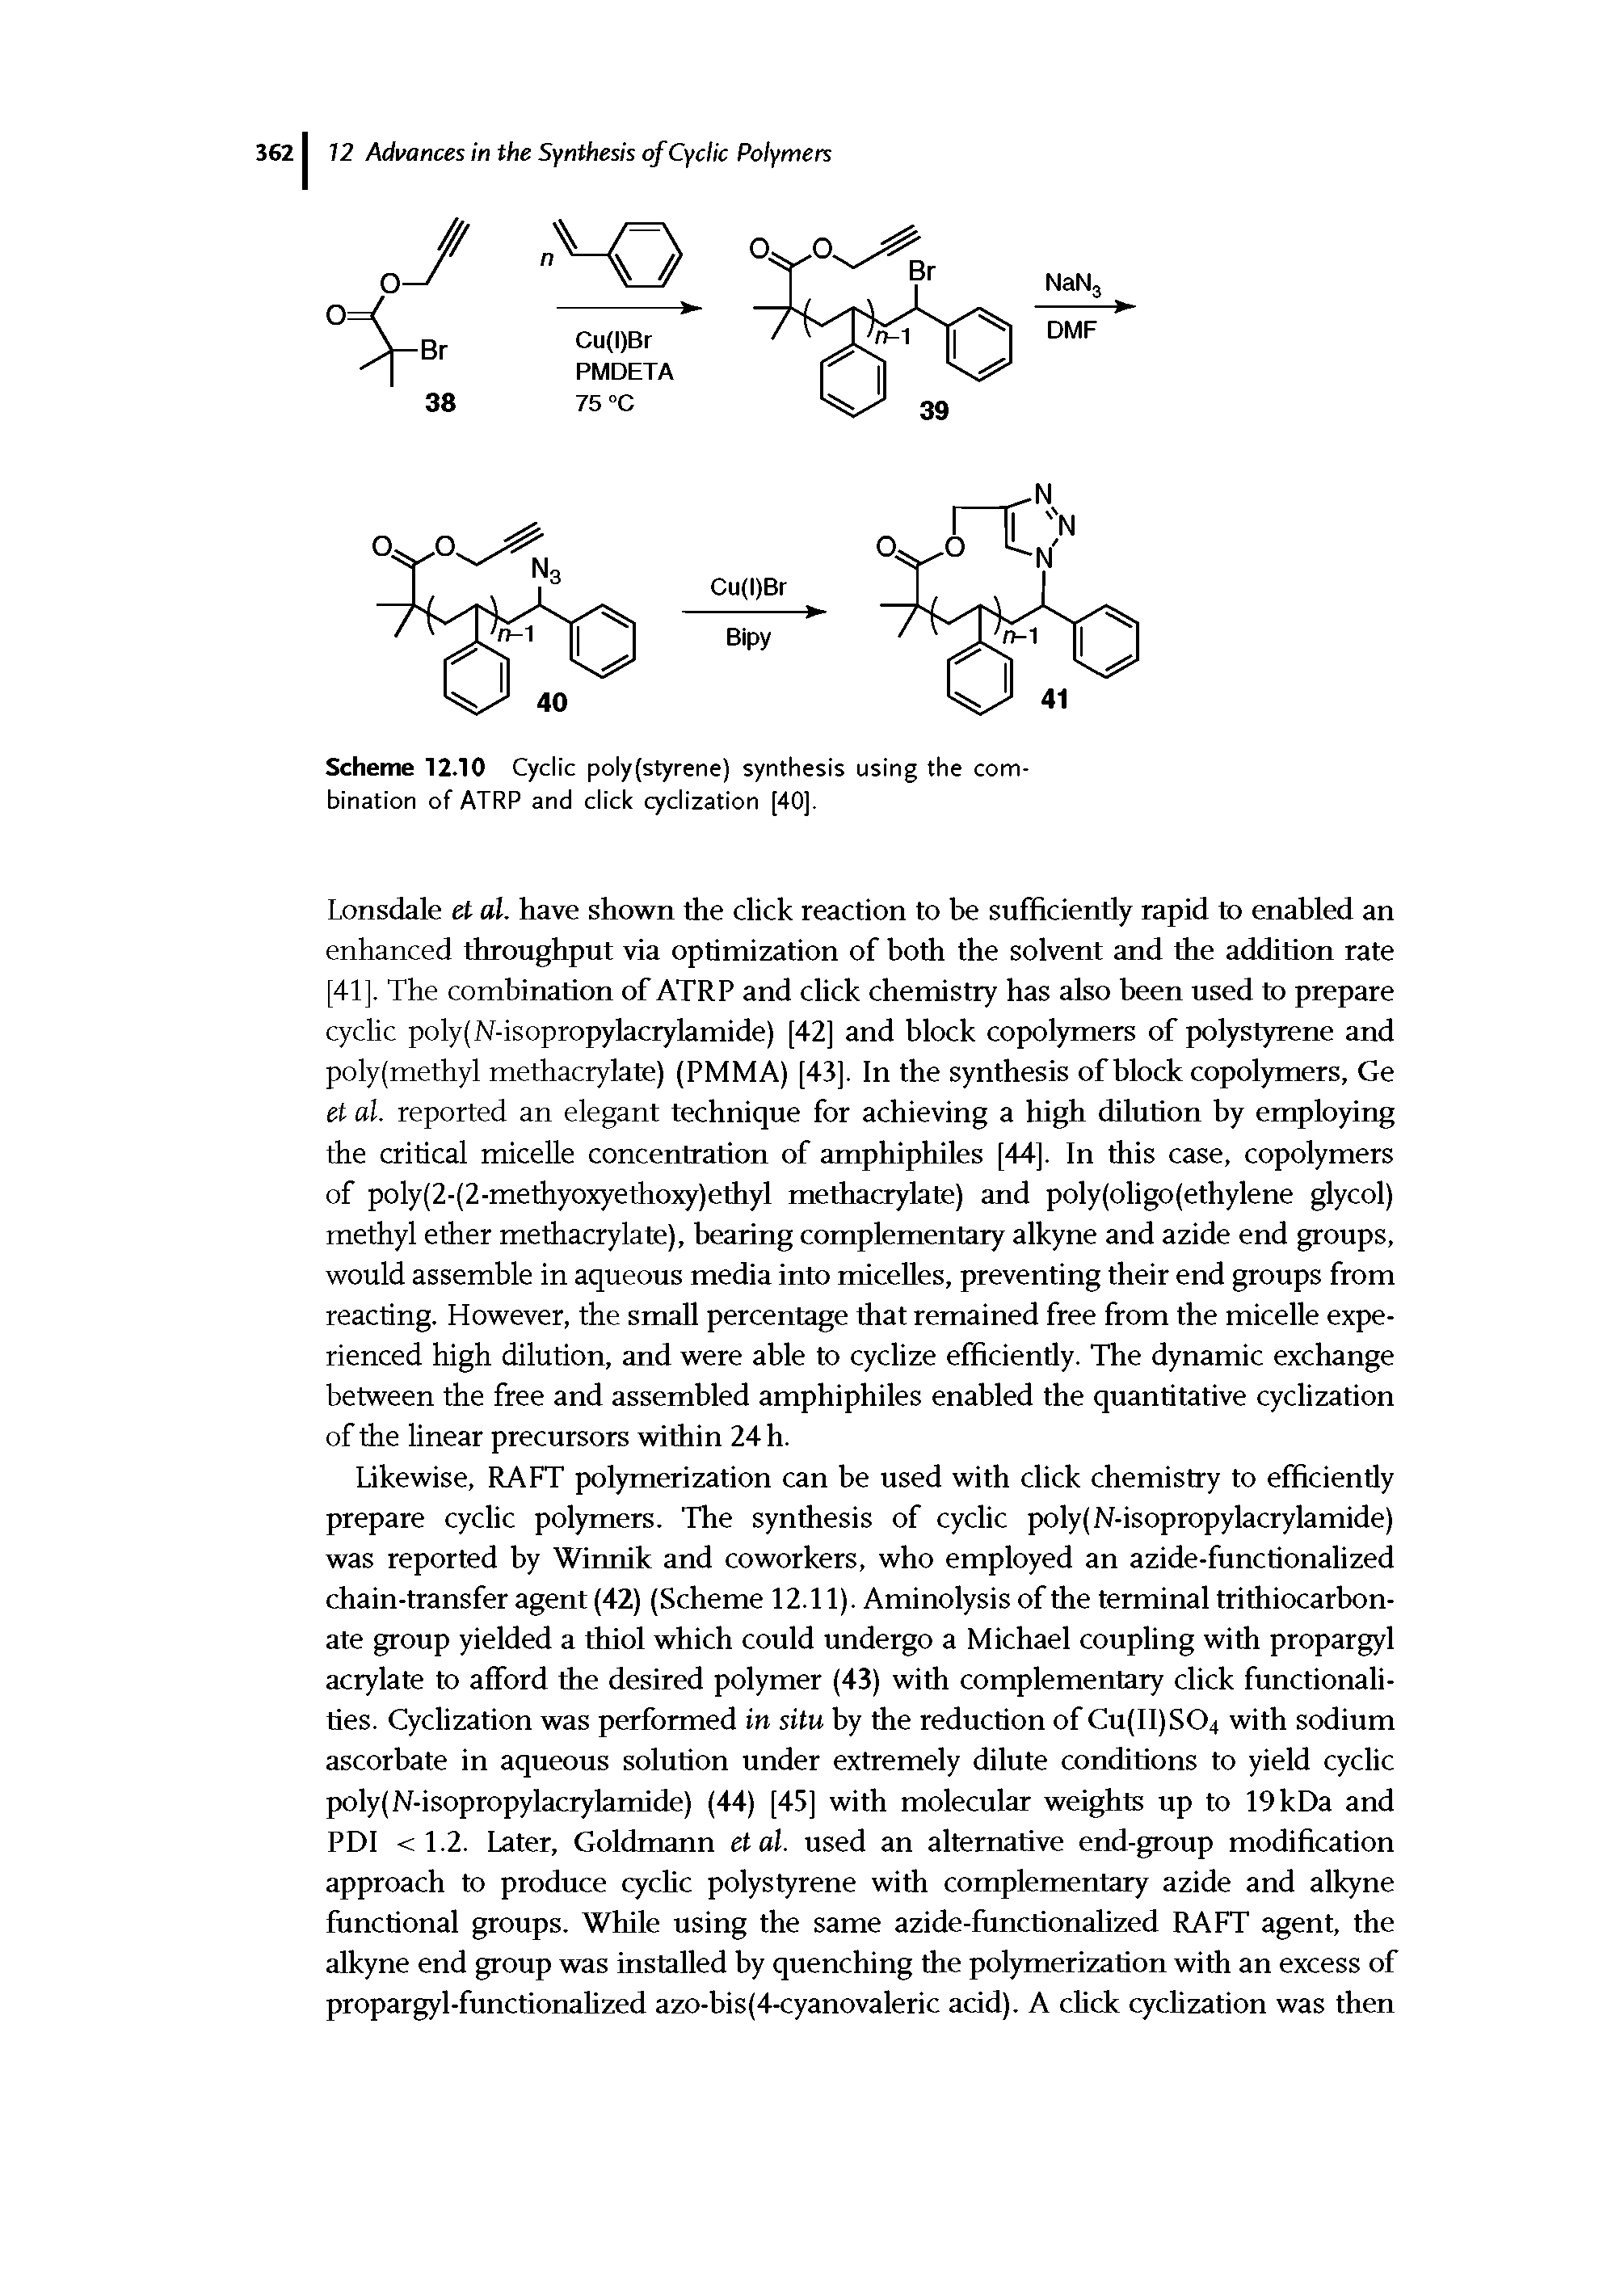 Scheme 12.10 Cyclic poly(styrene) synthesis using the combination of ATRP and click cyclization [40].